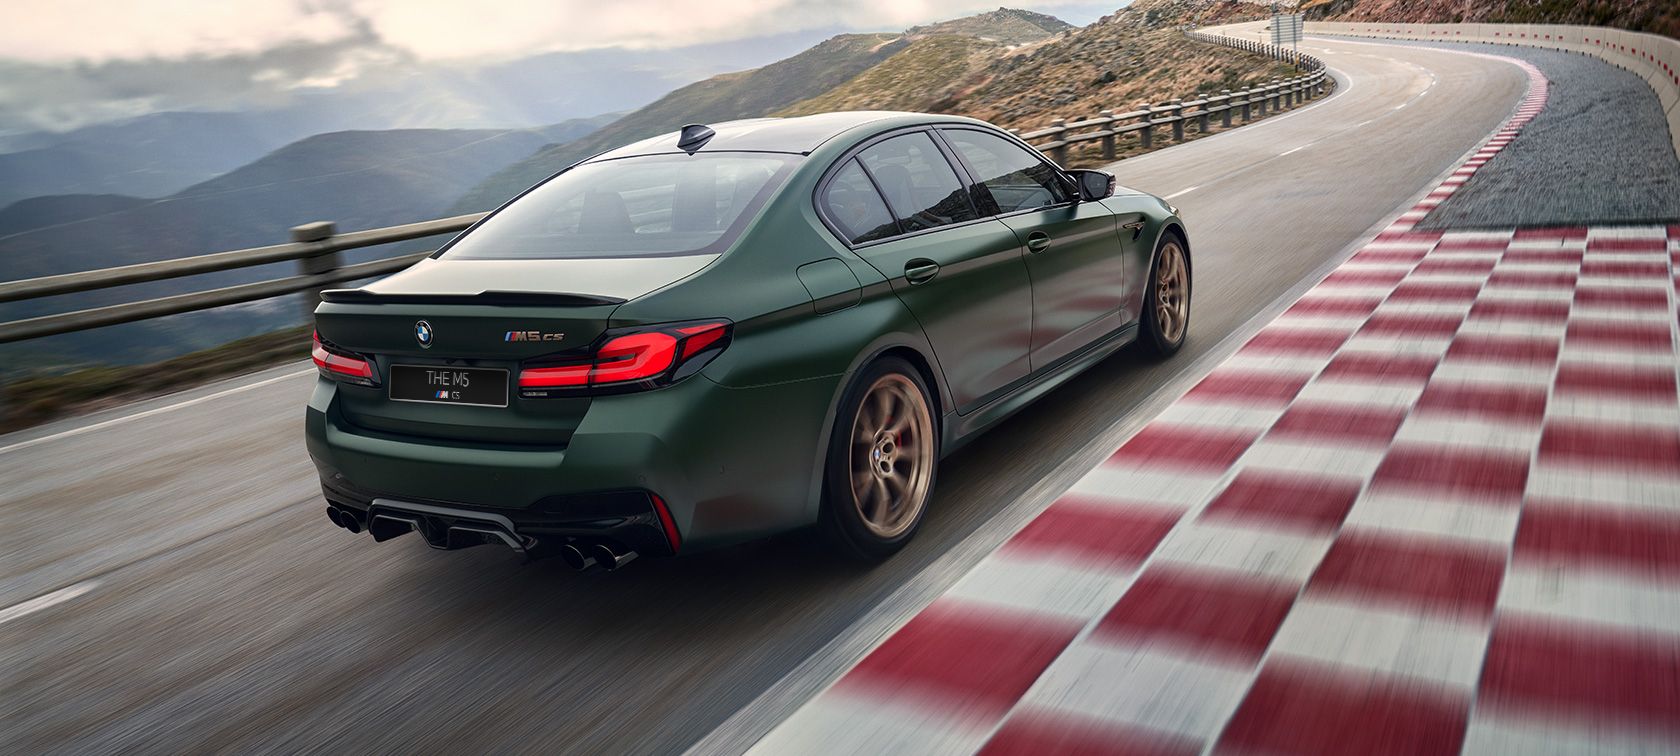 green BMW M5 CS rear angular view in the motion on the track